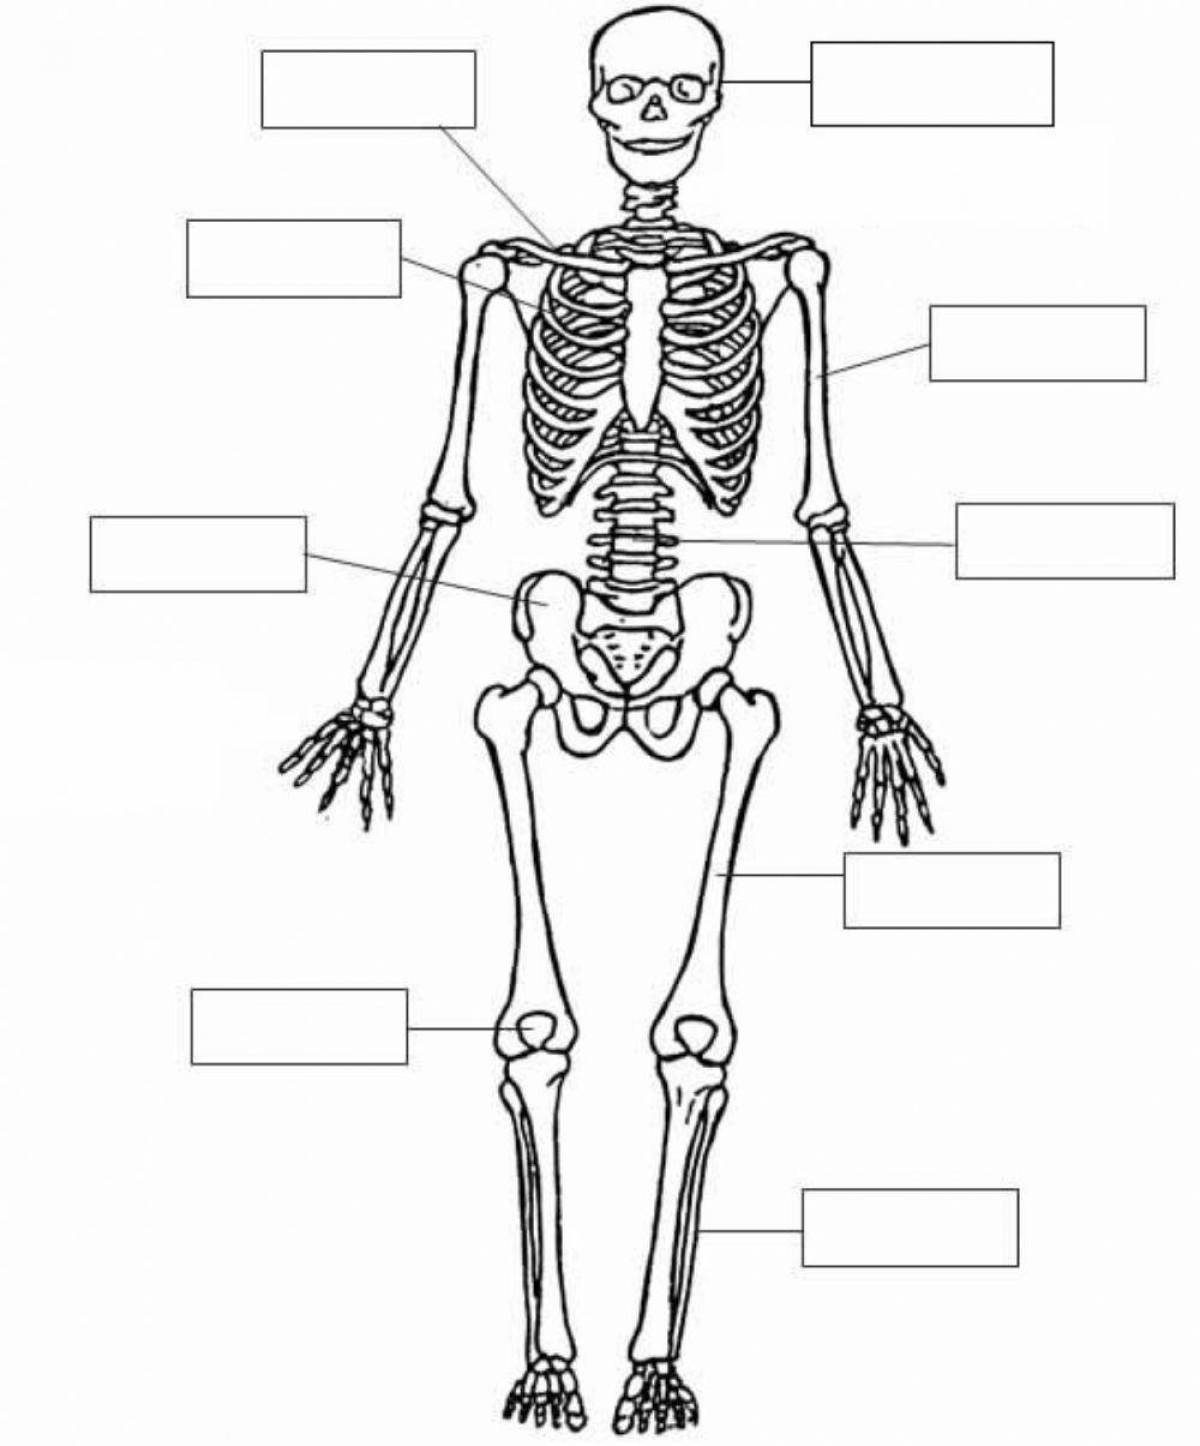 Impressive coloring of the structure of the human body Grade 2